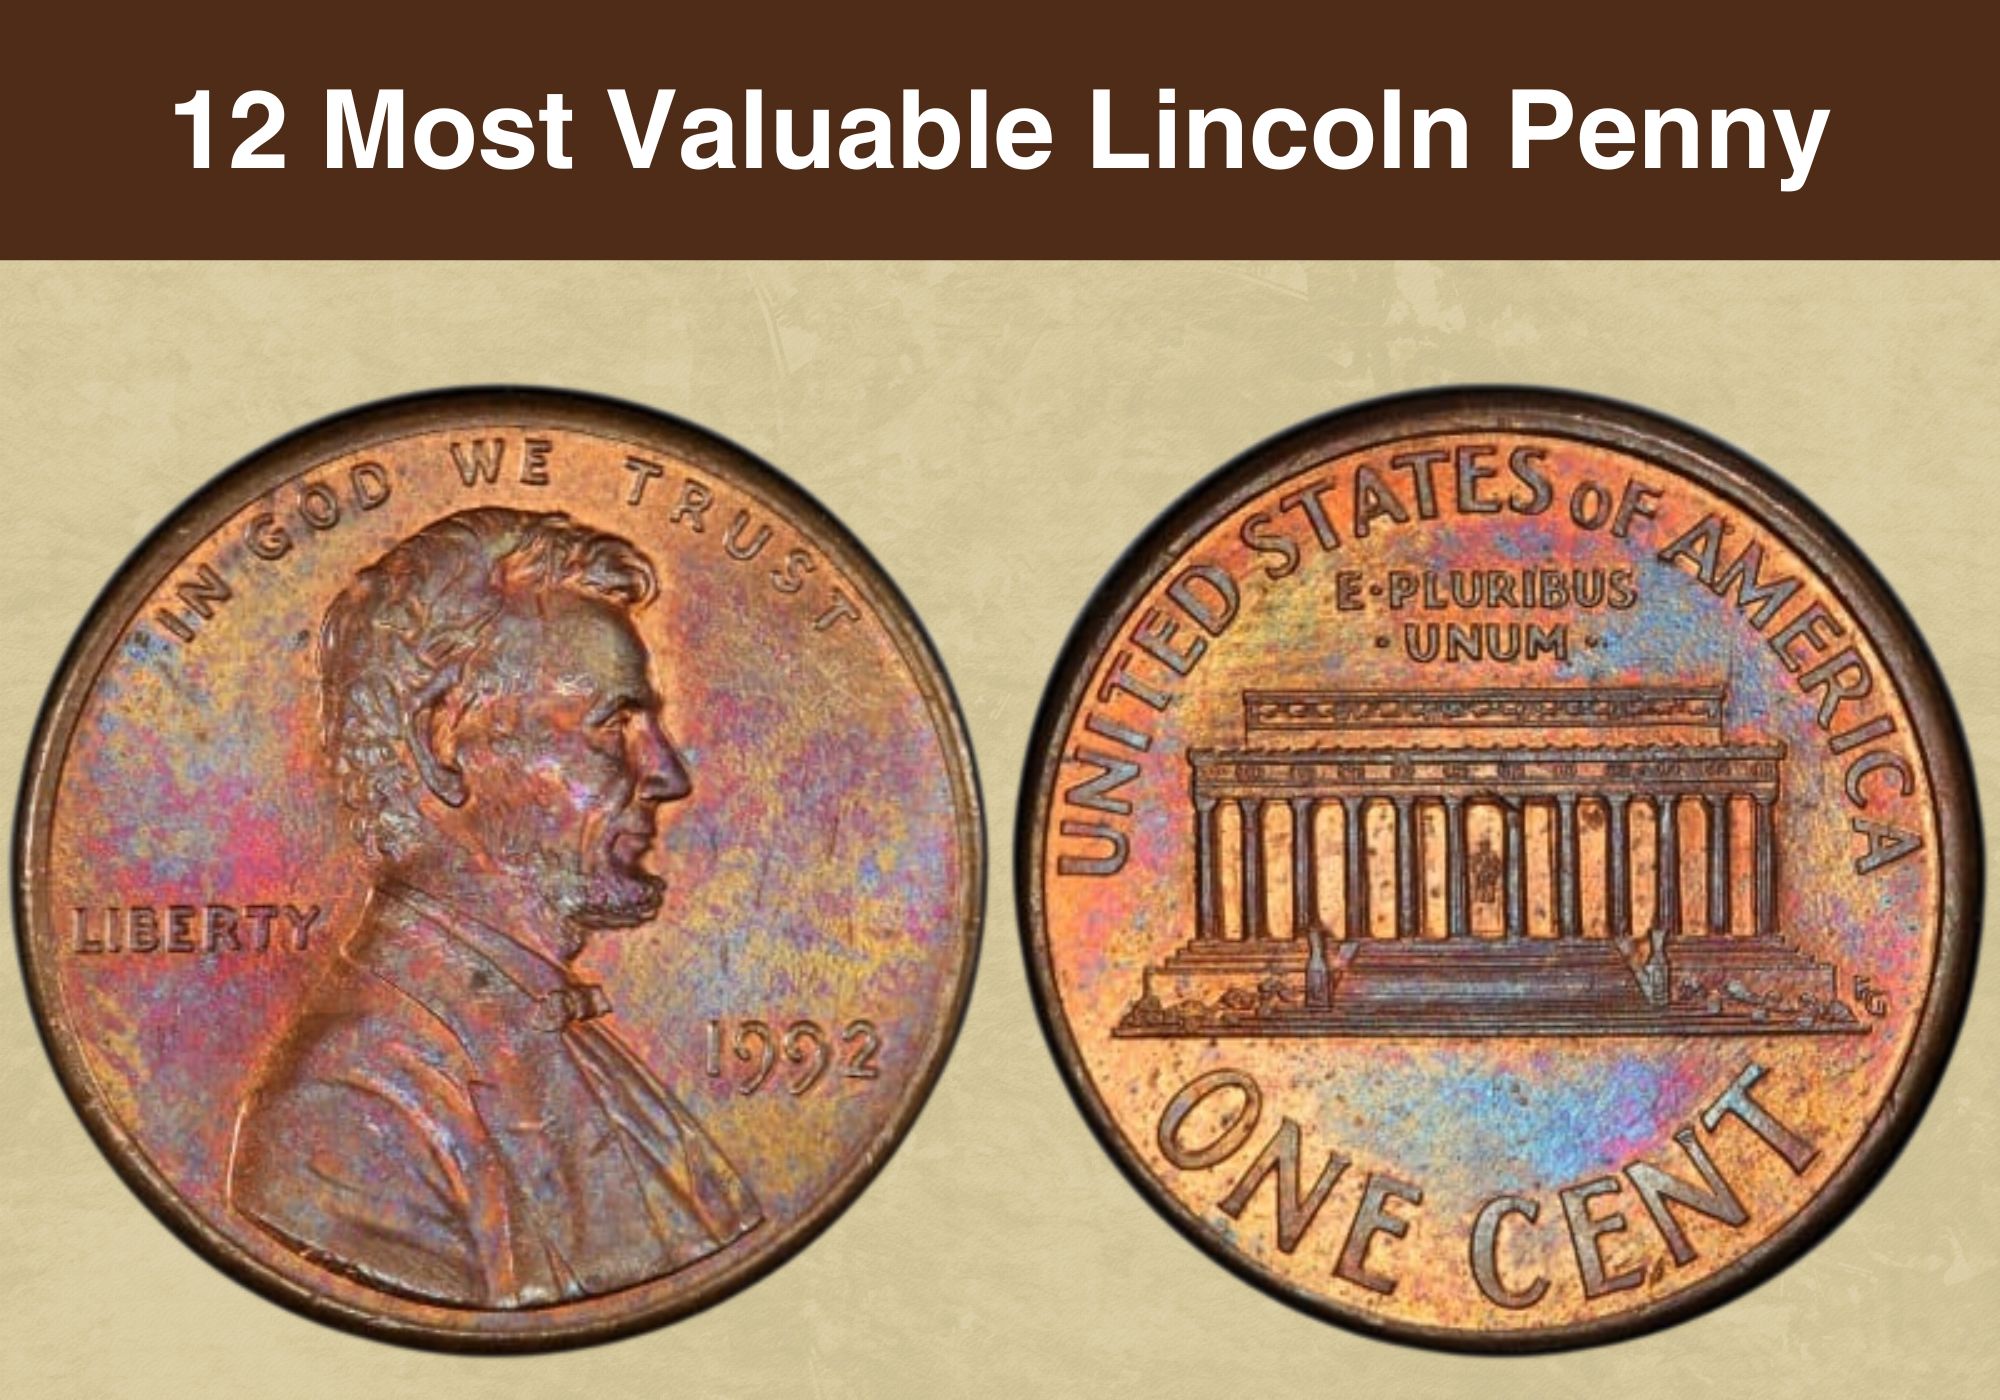 12 Most Valuable Lincoln Penny